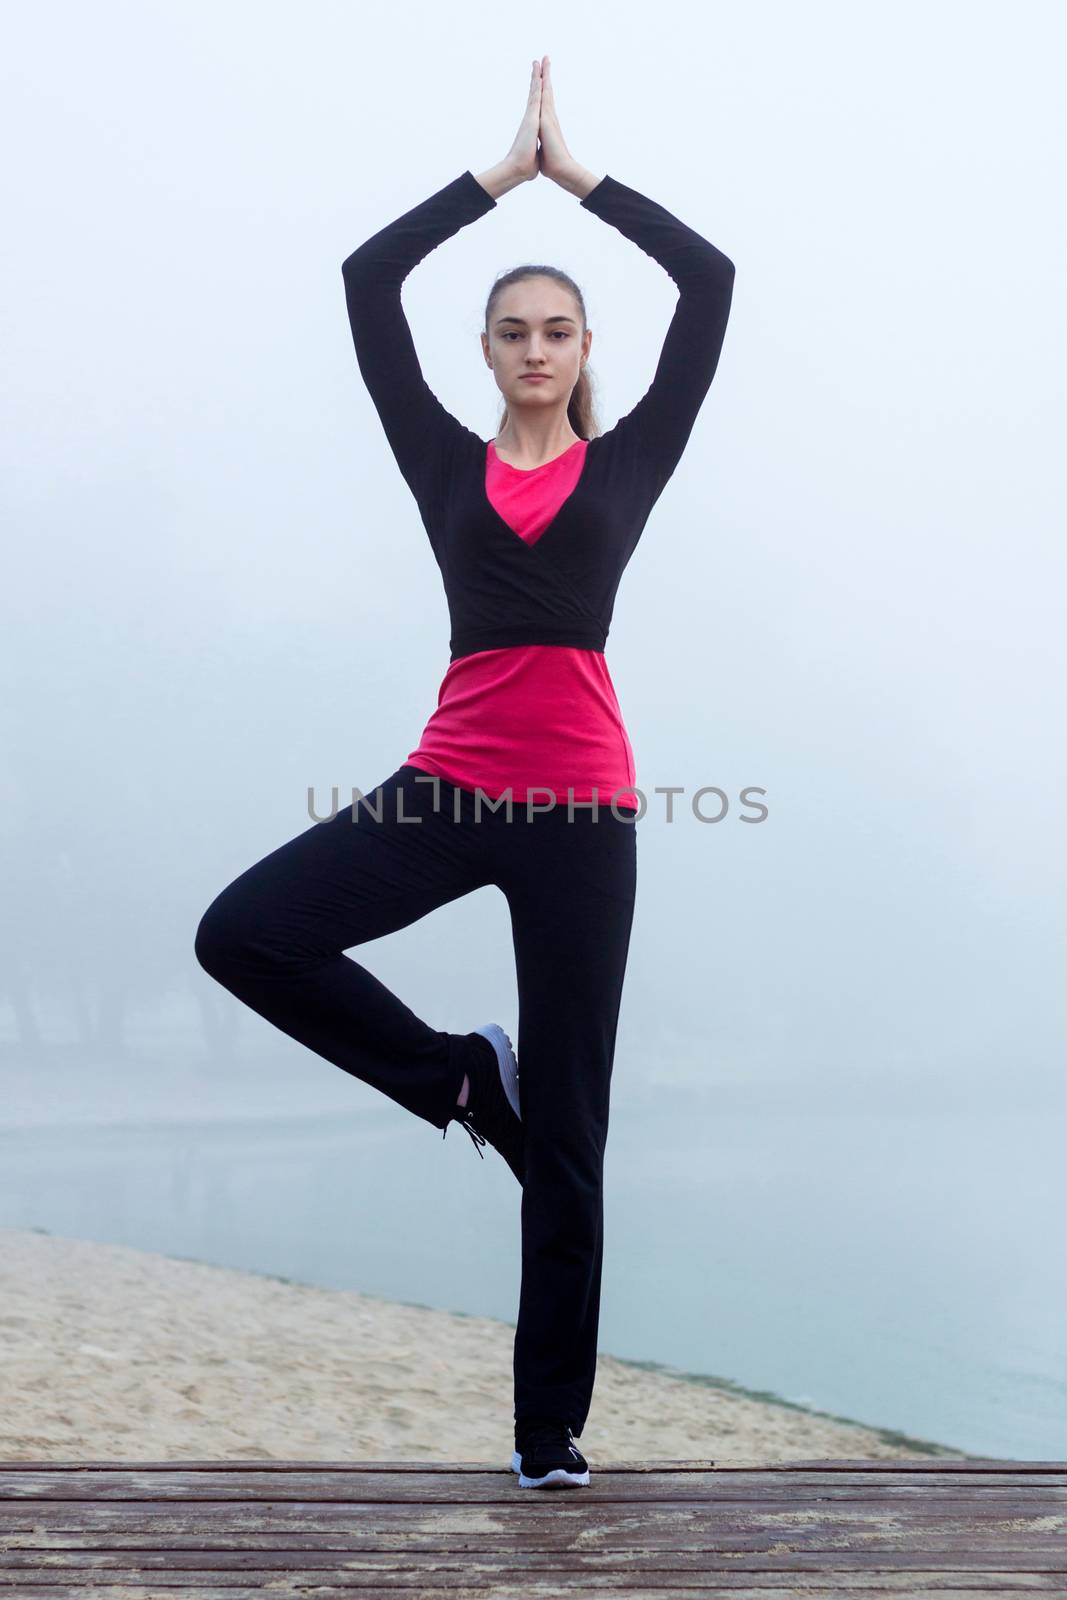 Young pretty slim fitness sporty woman does yoga exercises during training workout outdoor